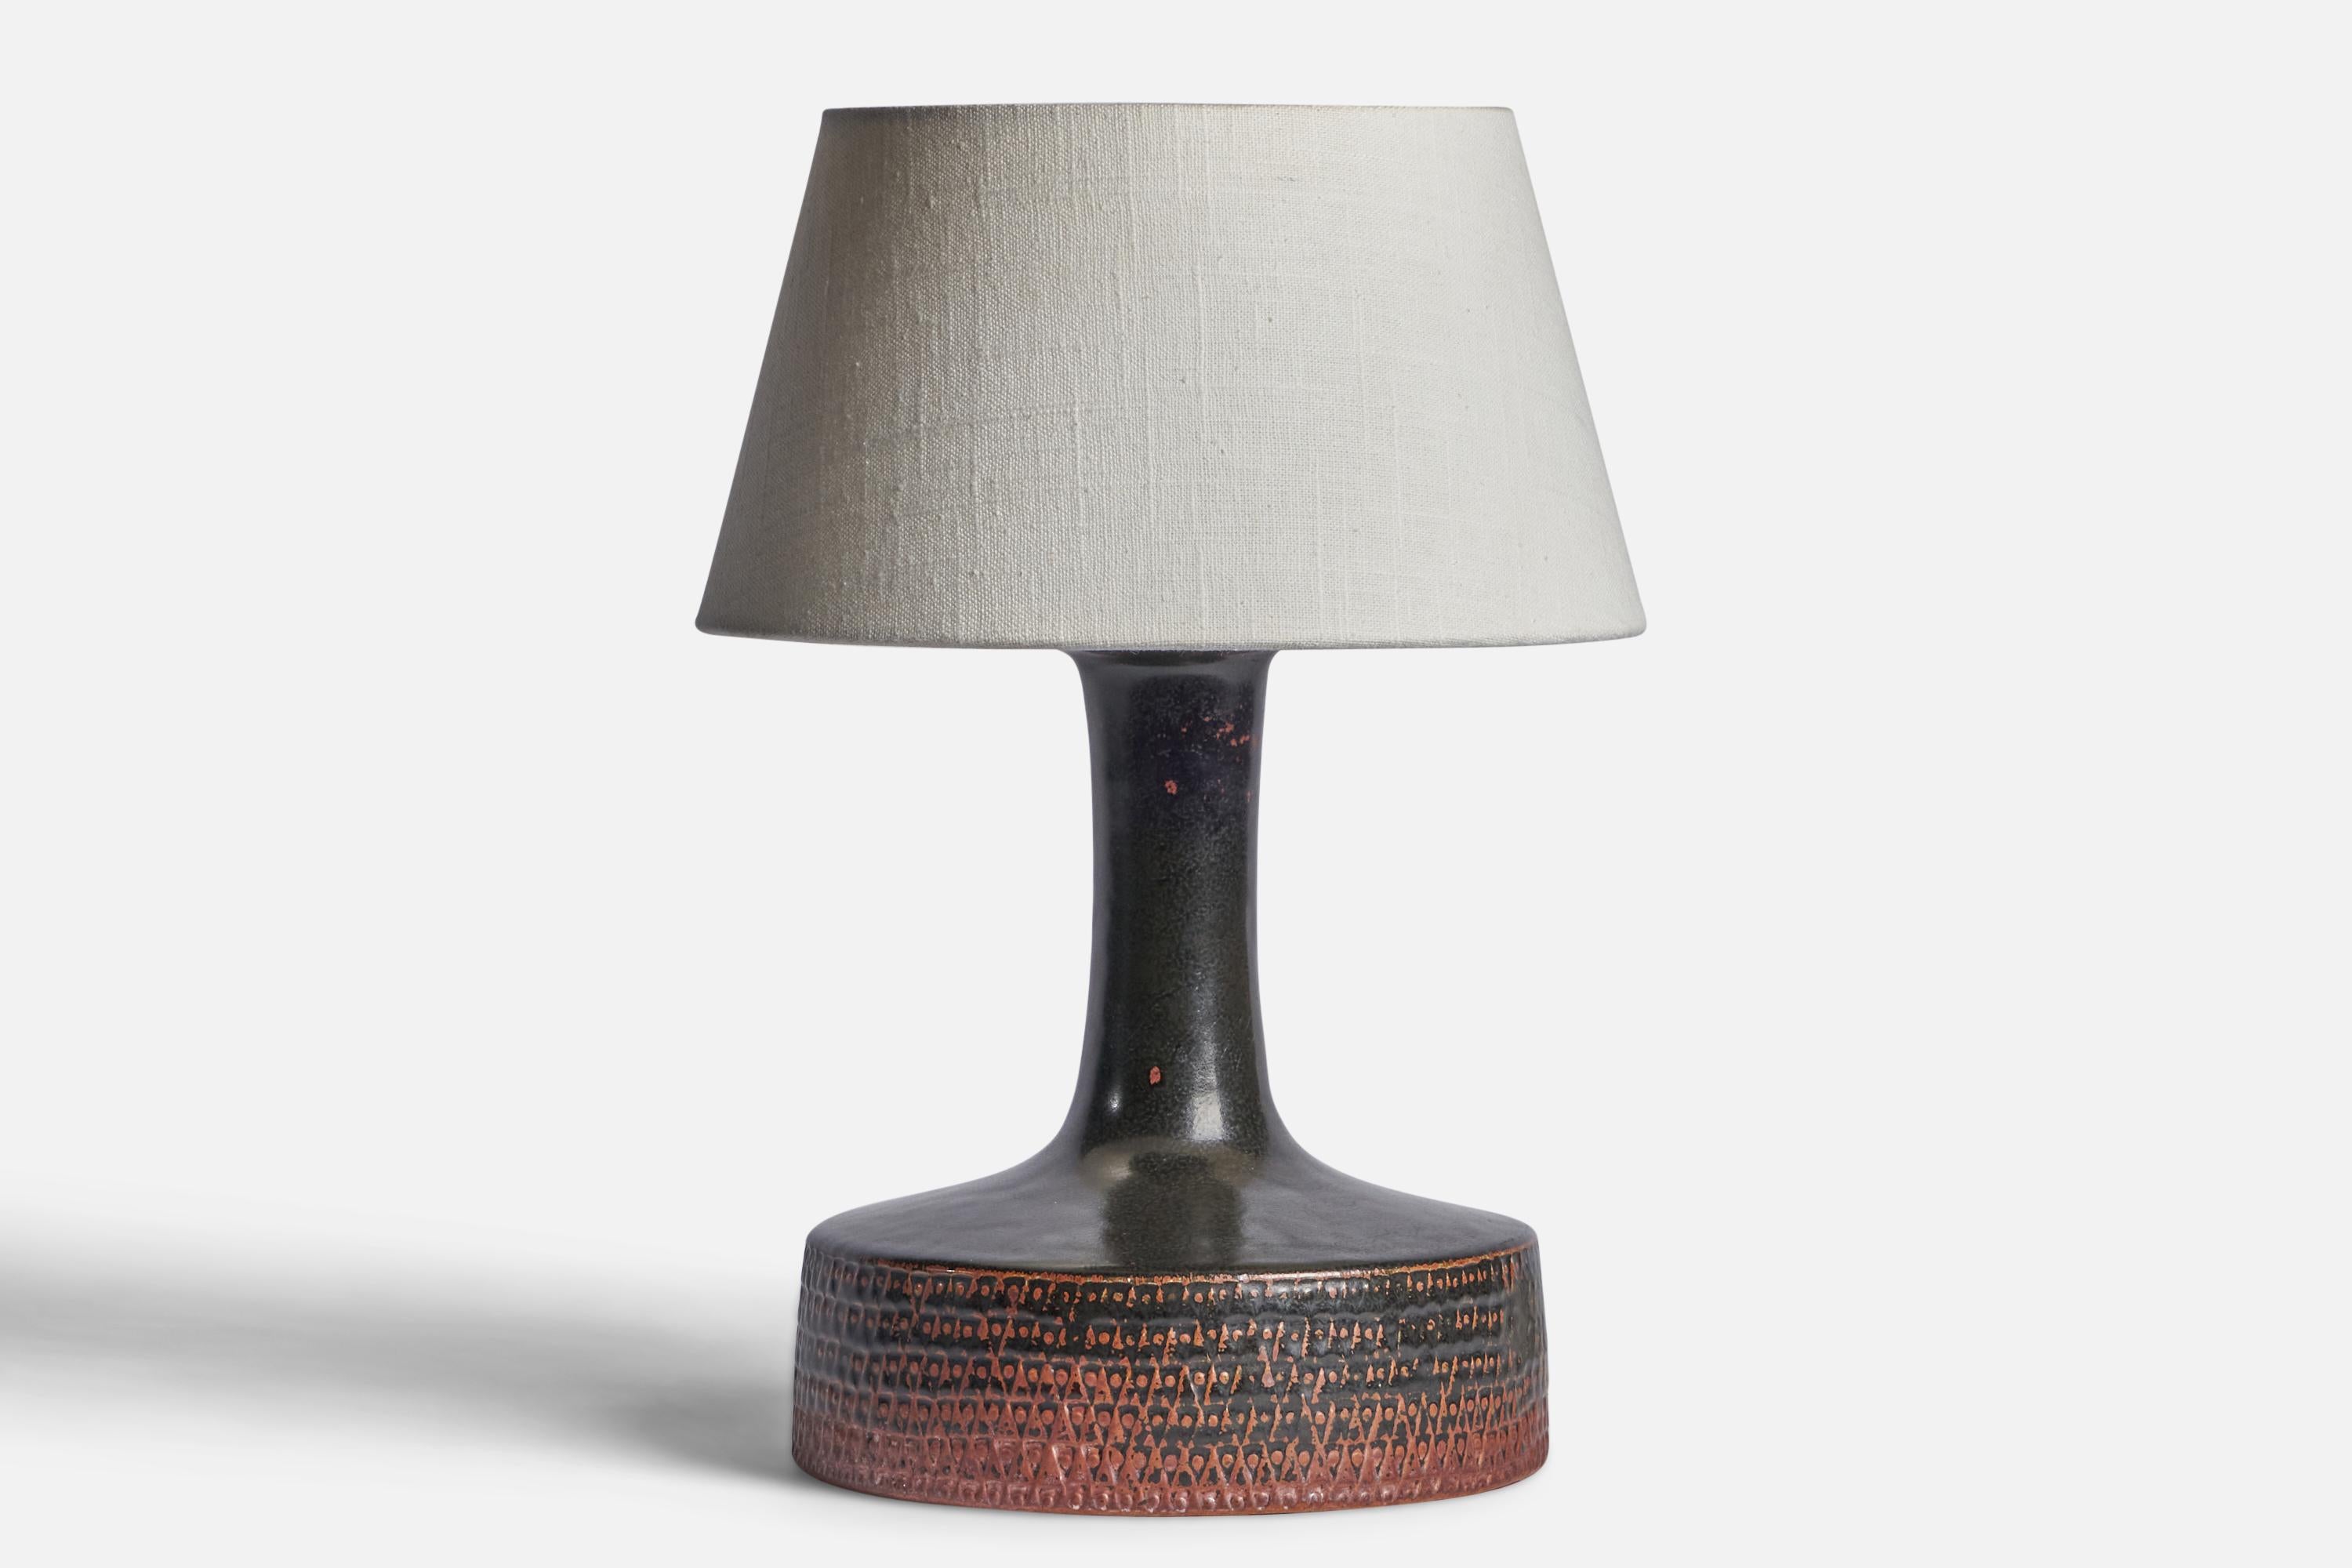 A black and orange-glazed incised stoneware table lamp designed by Stig Lindberg and produced by Gustavsberg, Sweden, 1950s.

Dimensions of Lamp (inches): 11” H x 8” Diameter
Dimensions of Shade (inches): 7” Top Diameter x 10” Bottom Diameter x